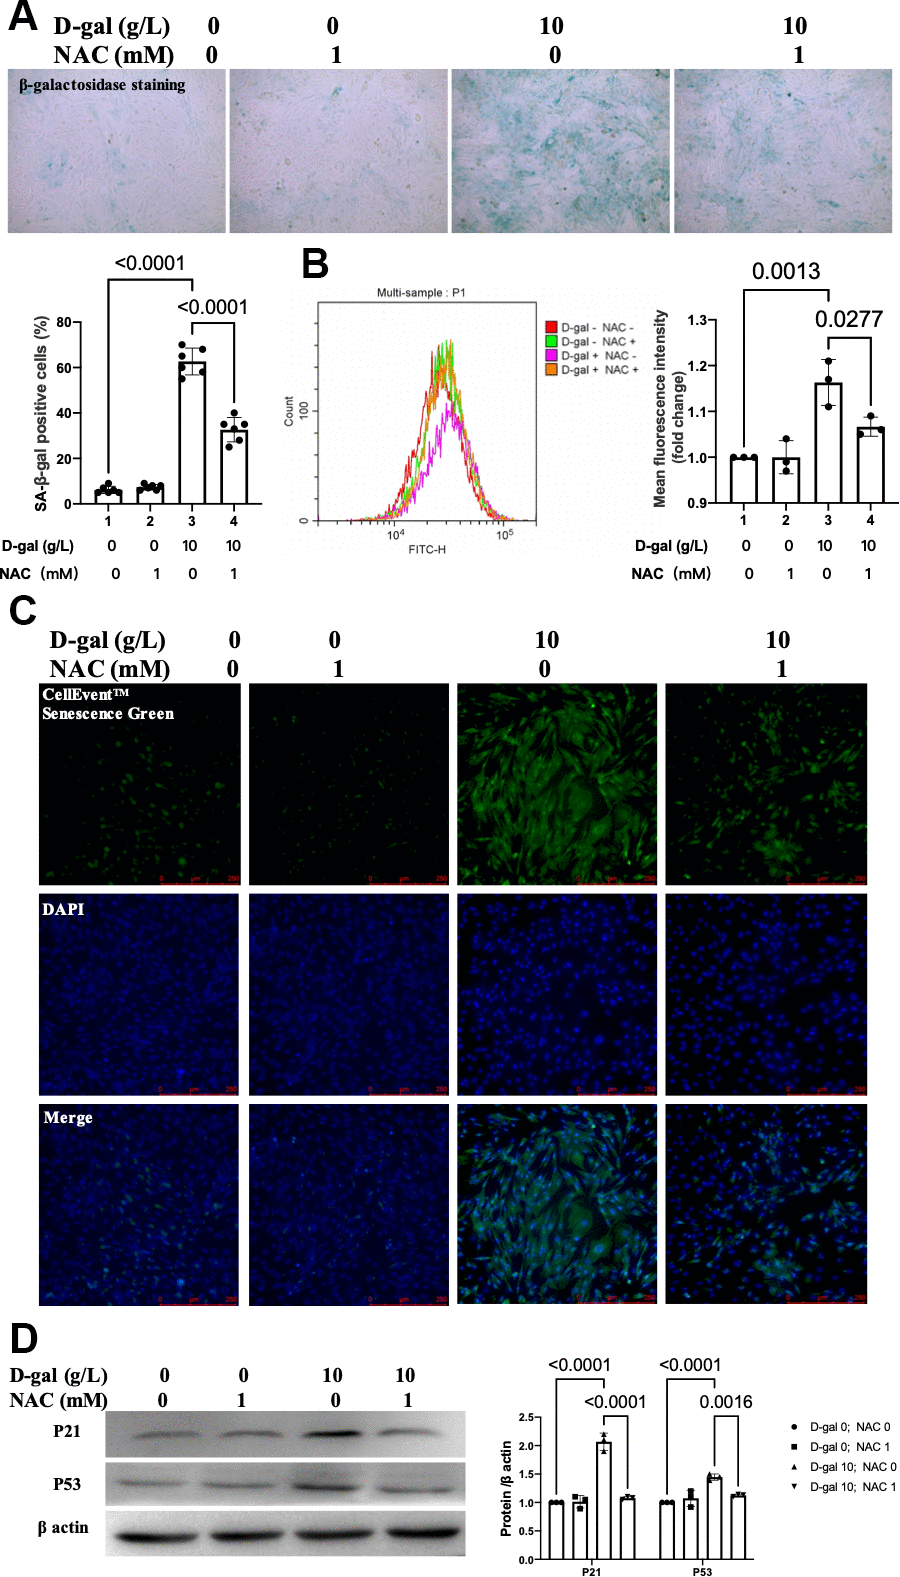 Inhibition ROS by NAC attenuated cardiocytes aging induced by D-gal in H9c2 cells. H9c2 cells were pre-treated with or without NAC (1 mM), a commonly used ROS scavenger, for 1 hour and then incubated with or without 10 g/L D-gal for 24 hours. (A) Representative bright-field photomicrographs showed that NAC treatment decreased the percentage of cells expressing β-galactosidase. (B) Flow cytometry analysis was applied to detect the β-galactosidase mean fluorescence intensity after the NAC treatment. (C) The CellEvent™ Senescence Green staining showed that NAC treatment decreased the senescence-associated β-galactosidase expression induced by D-gal. (D) The aging-associated proteins (P53, P21) were detected by western blot, and the corresponding quantification was present.